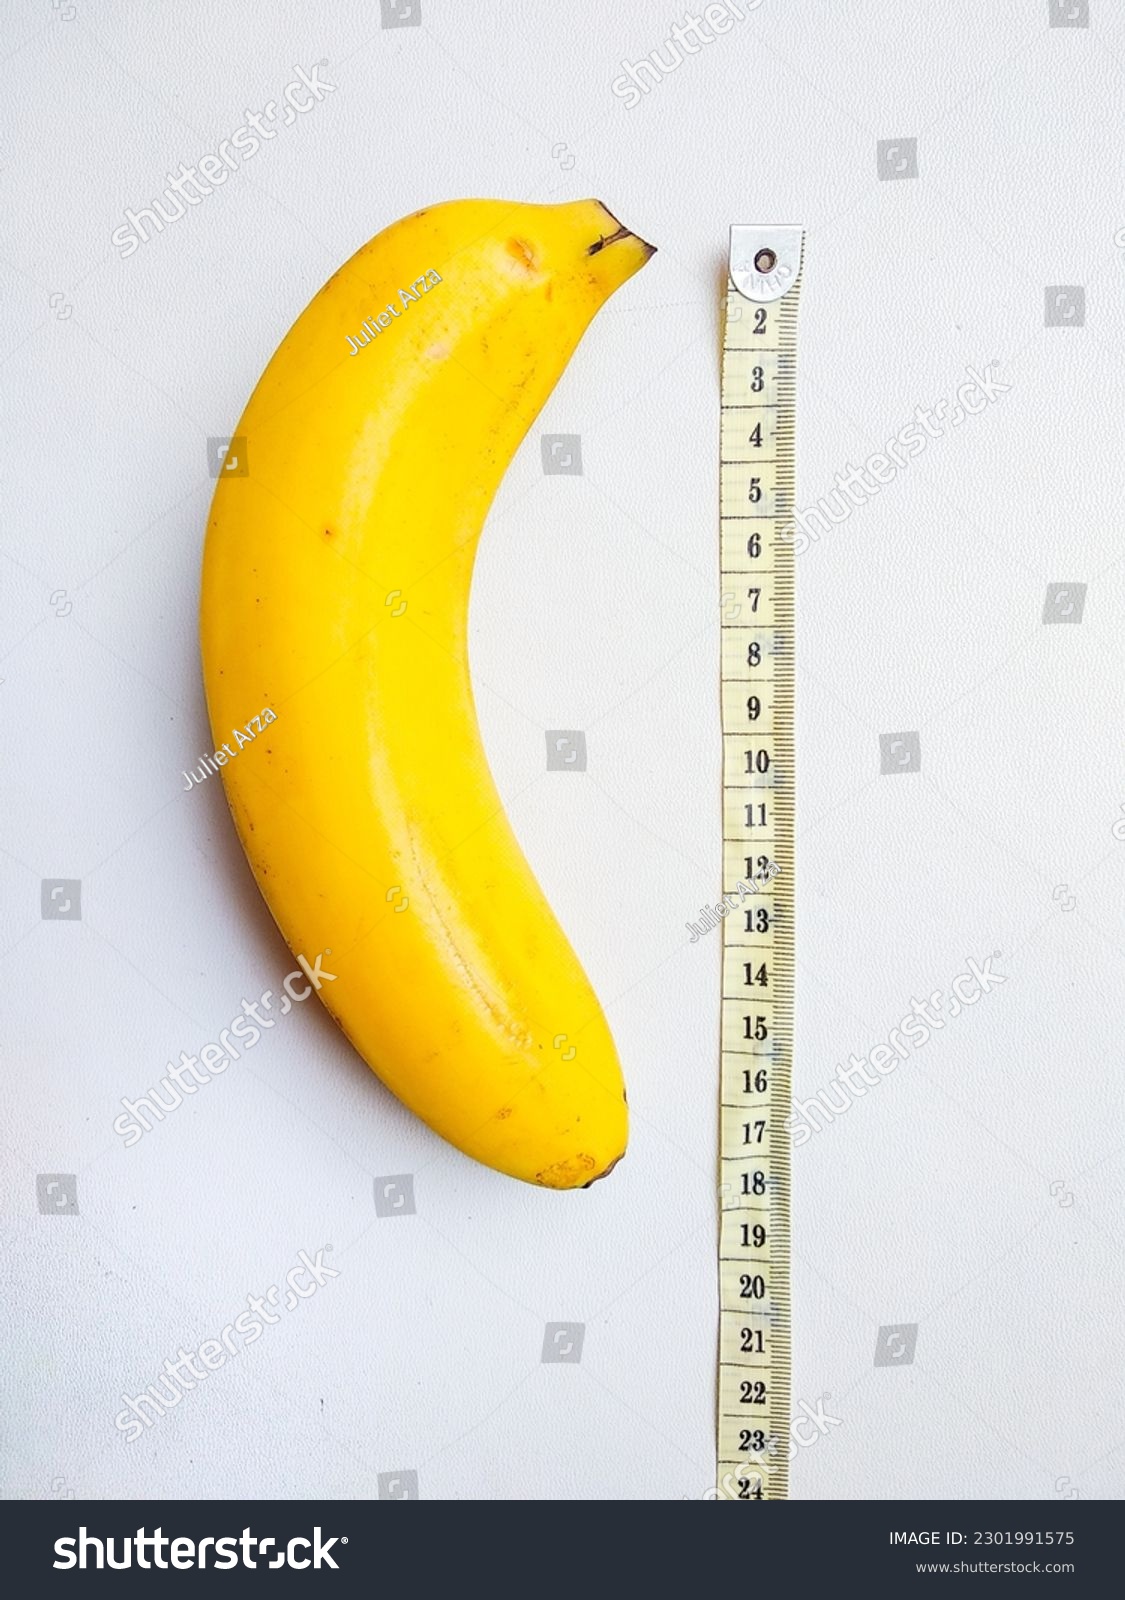 Yellow banana with measurement tape on white background. Male genitalia size concept #2301991575